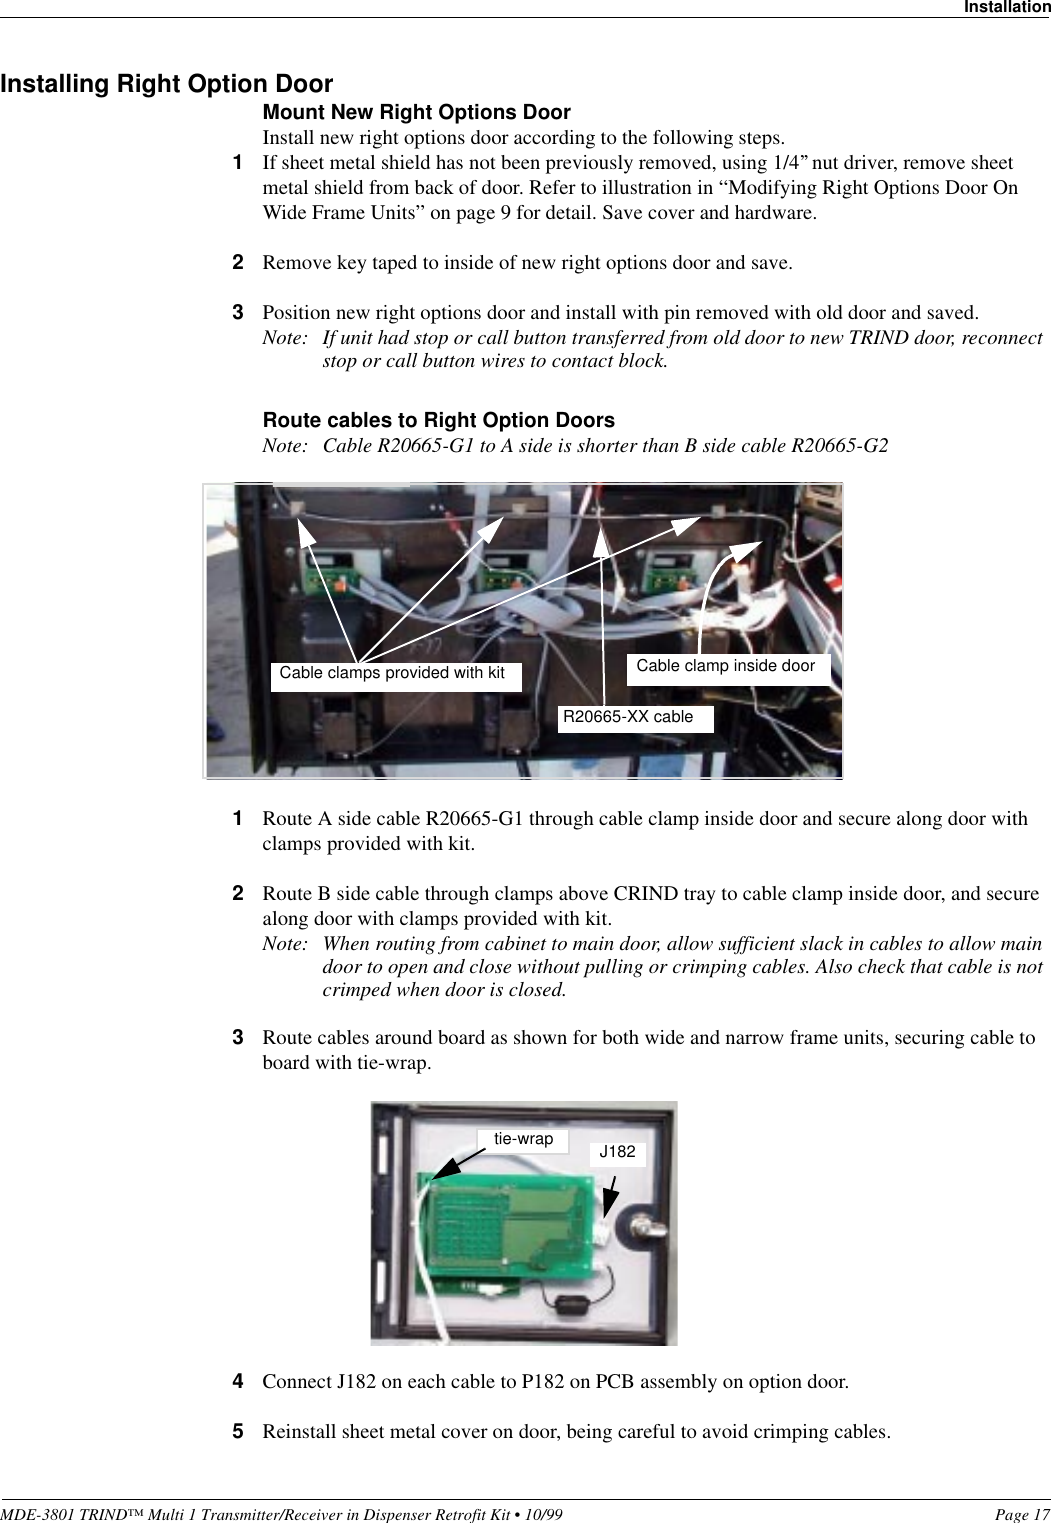 MDE-3801 TRIND™ Multi 1 Transmitter/Receiver in Dispenser Retrofit Kit • 10/99 Page 17InstallationInstalling Right Option DoorMount New Right Options DoorInstall new right options door according to the following steps.1If sheet metal shield has not been previously removed, using 1/4’’ nut driver, remove sheet metal shield from back of door. Refer to illustration in “Modifying Right Options Door On Wide Frame Units” on page 9 for detail. Save cover and hardware.2Remove key taped to inside of new right options door and save.3Position new right options door and install with pin removed with old door and saved.Note: If unit had stop or call button transferred from old door to new TRIND door, reconnect stop or call button wires to contact block.Route cables to Right Option DoorsNote: Cable R20665-G1 to A side is shorter than B side cable R20665-G21Route A side cable R20665-G1 through cable clamp inside door and secure along door with clamps provided with kit.2Route B side cable through clamps above CRIND tray to cable clamp inside door, and secure along door with clamps provided with kit.Note: When routing from cabinet to main door, allow sufficient slack in cables to allow main door to open and close without pulling or crimping cables. Also check that cable is not crimped when door is closed.3Route cables around board as shown for both wide and narrow frame units, securing cable to board with tie-wrap.4Connect J182 on each cable to P182 on PCB assembly on option door.5Reinstall sheet metal cover on door, being careful to avoid crimping cables.Cable clamps provided with kitR20665-XX cableCable clamp inside doortie-wrap J182